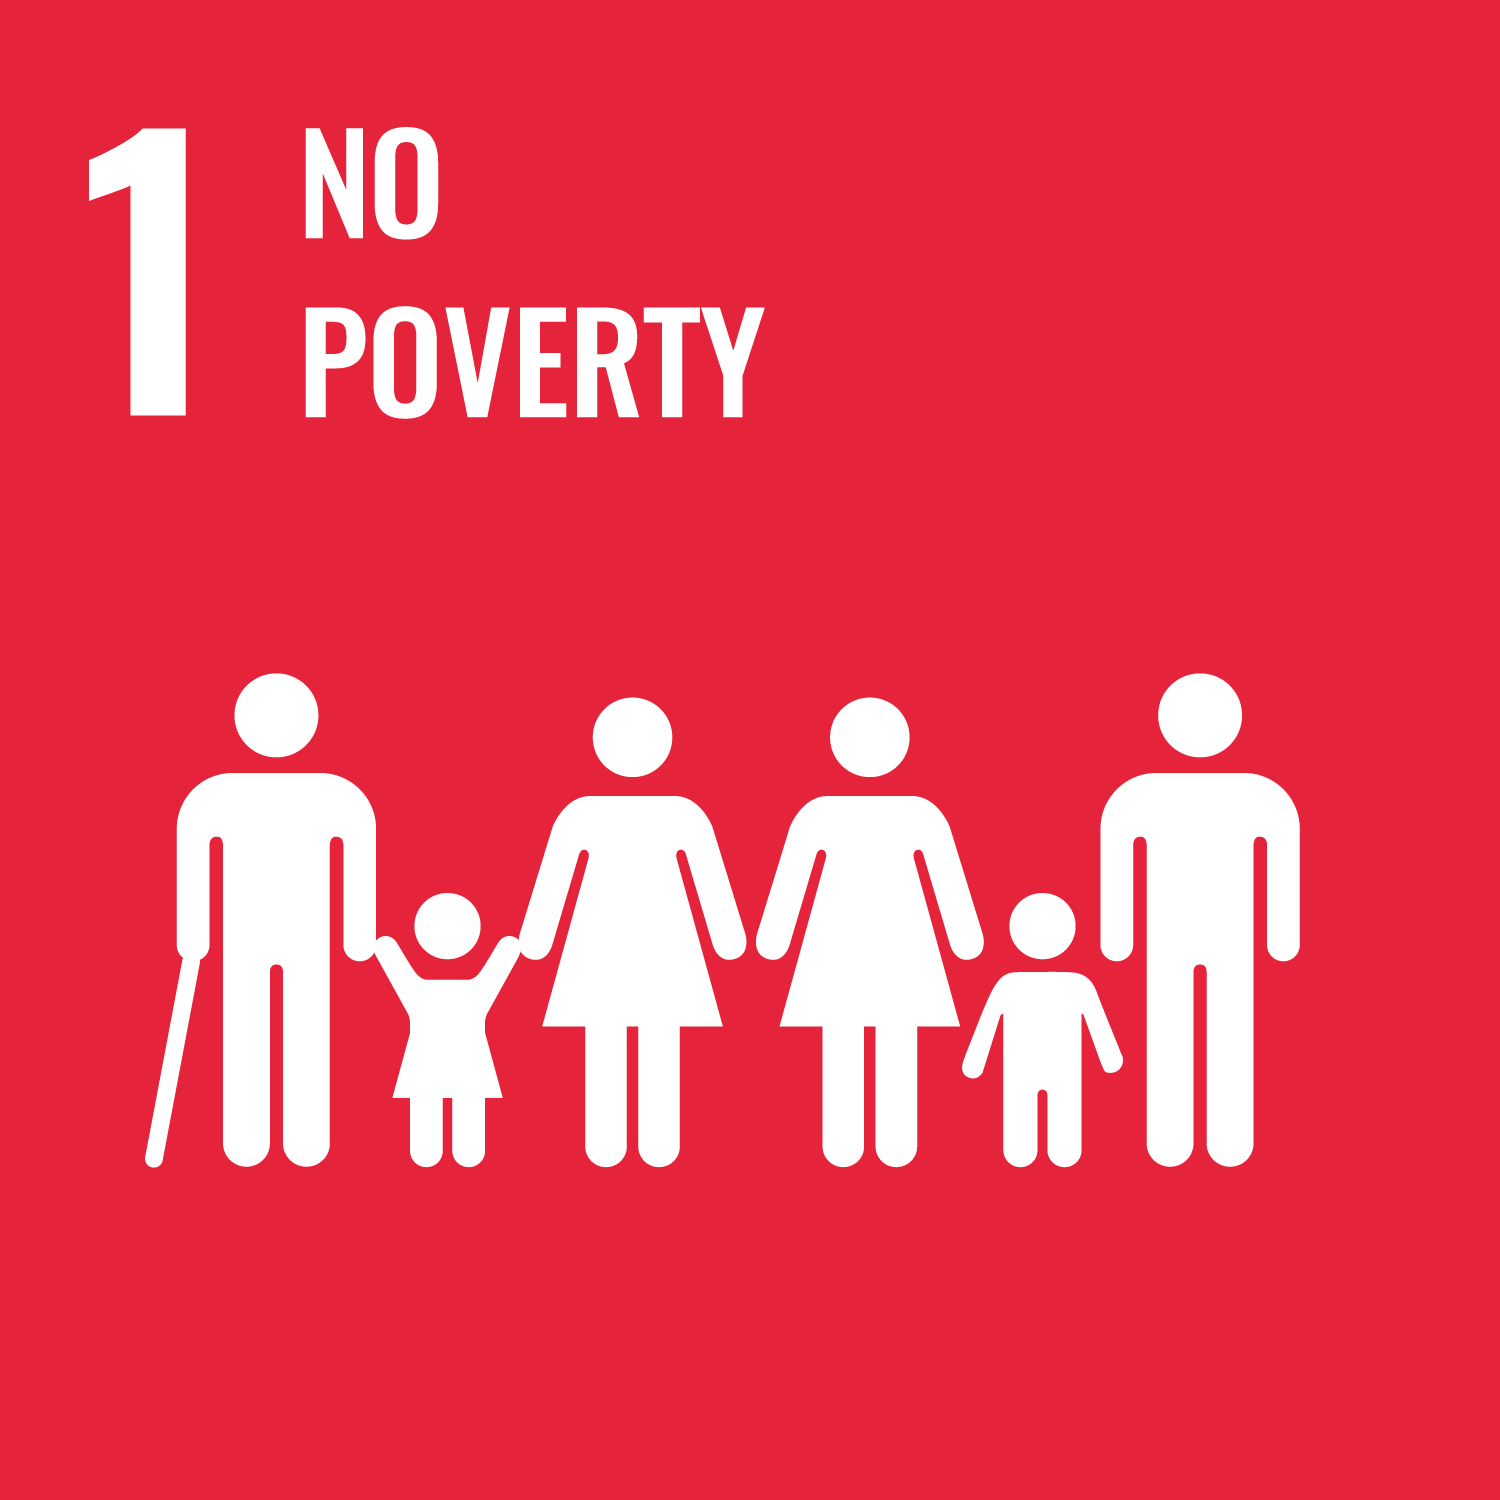 Goal One: End poverty in all its forms everywhere